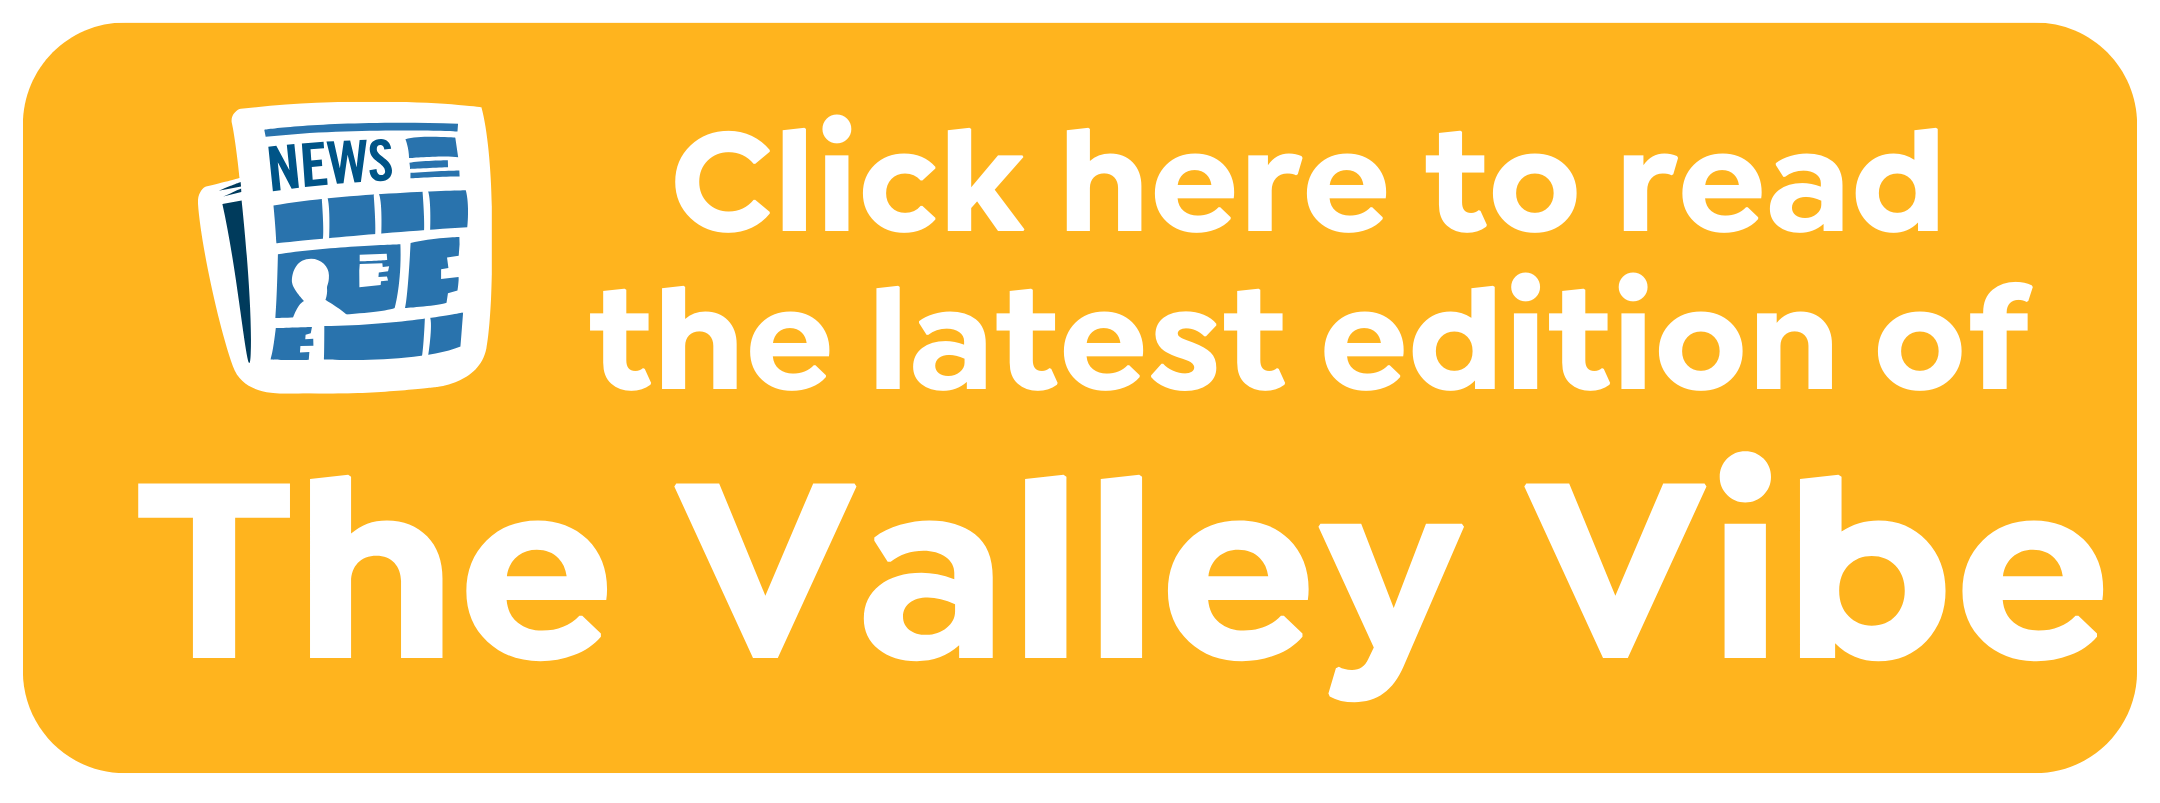 CLick here to view the latest edition of the valley vibe2.png